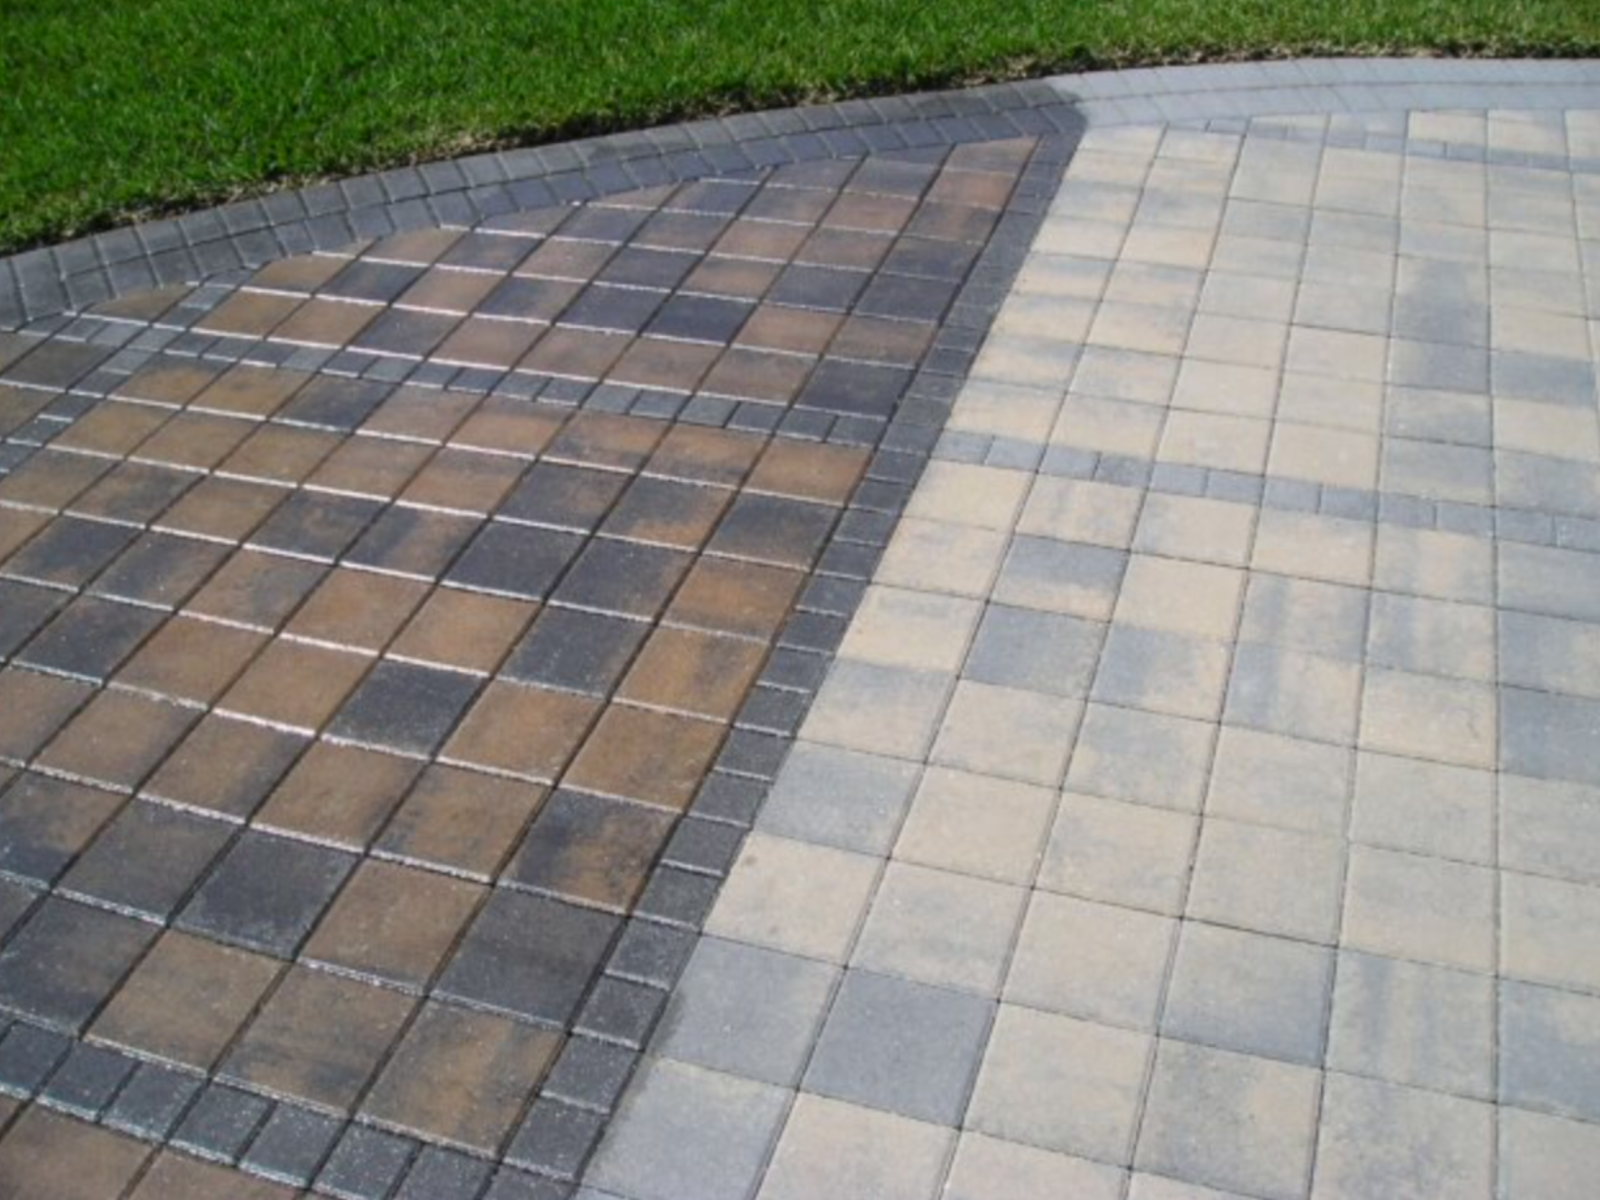 Driveway cleaning and sealing service in Hull